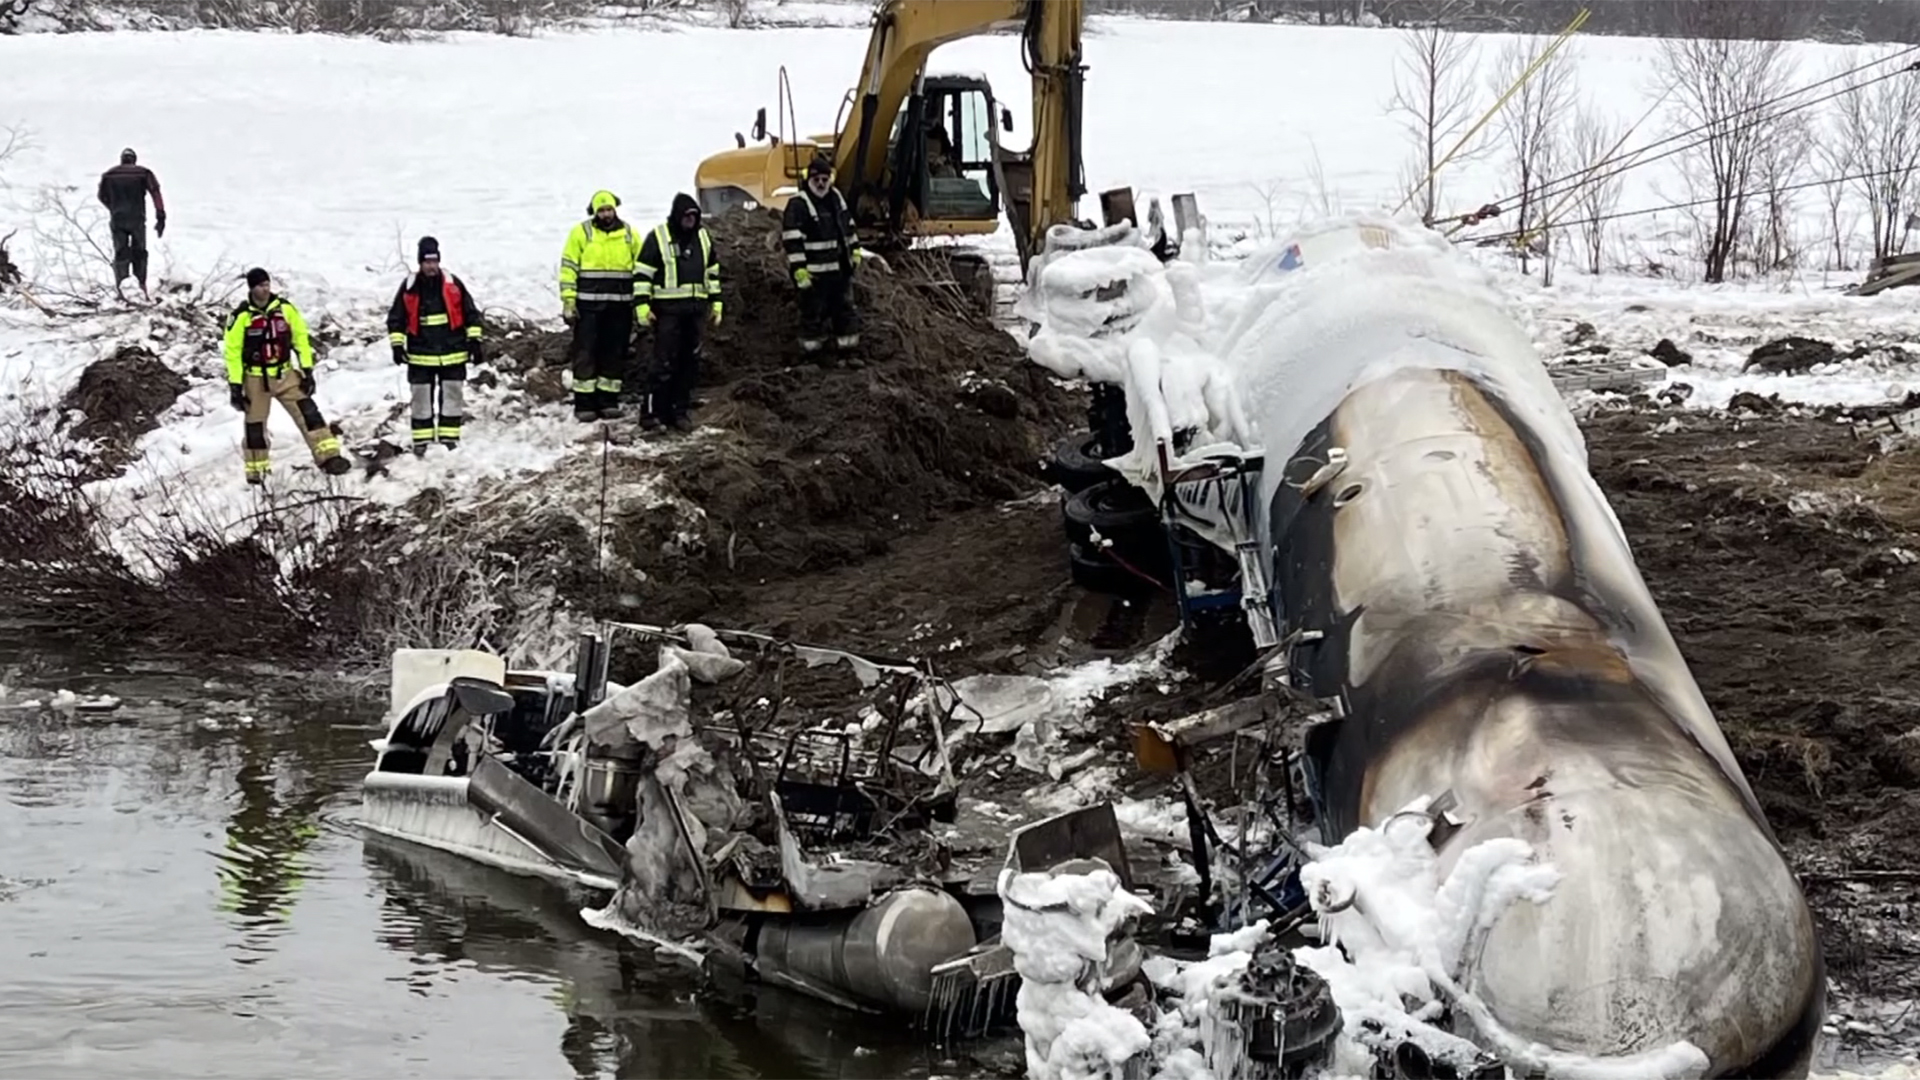 Police expect evacuation zone to remain as long as crashed propane tanker  burns in Irasburg